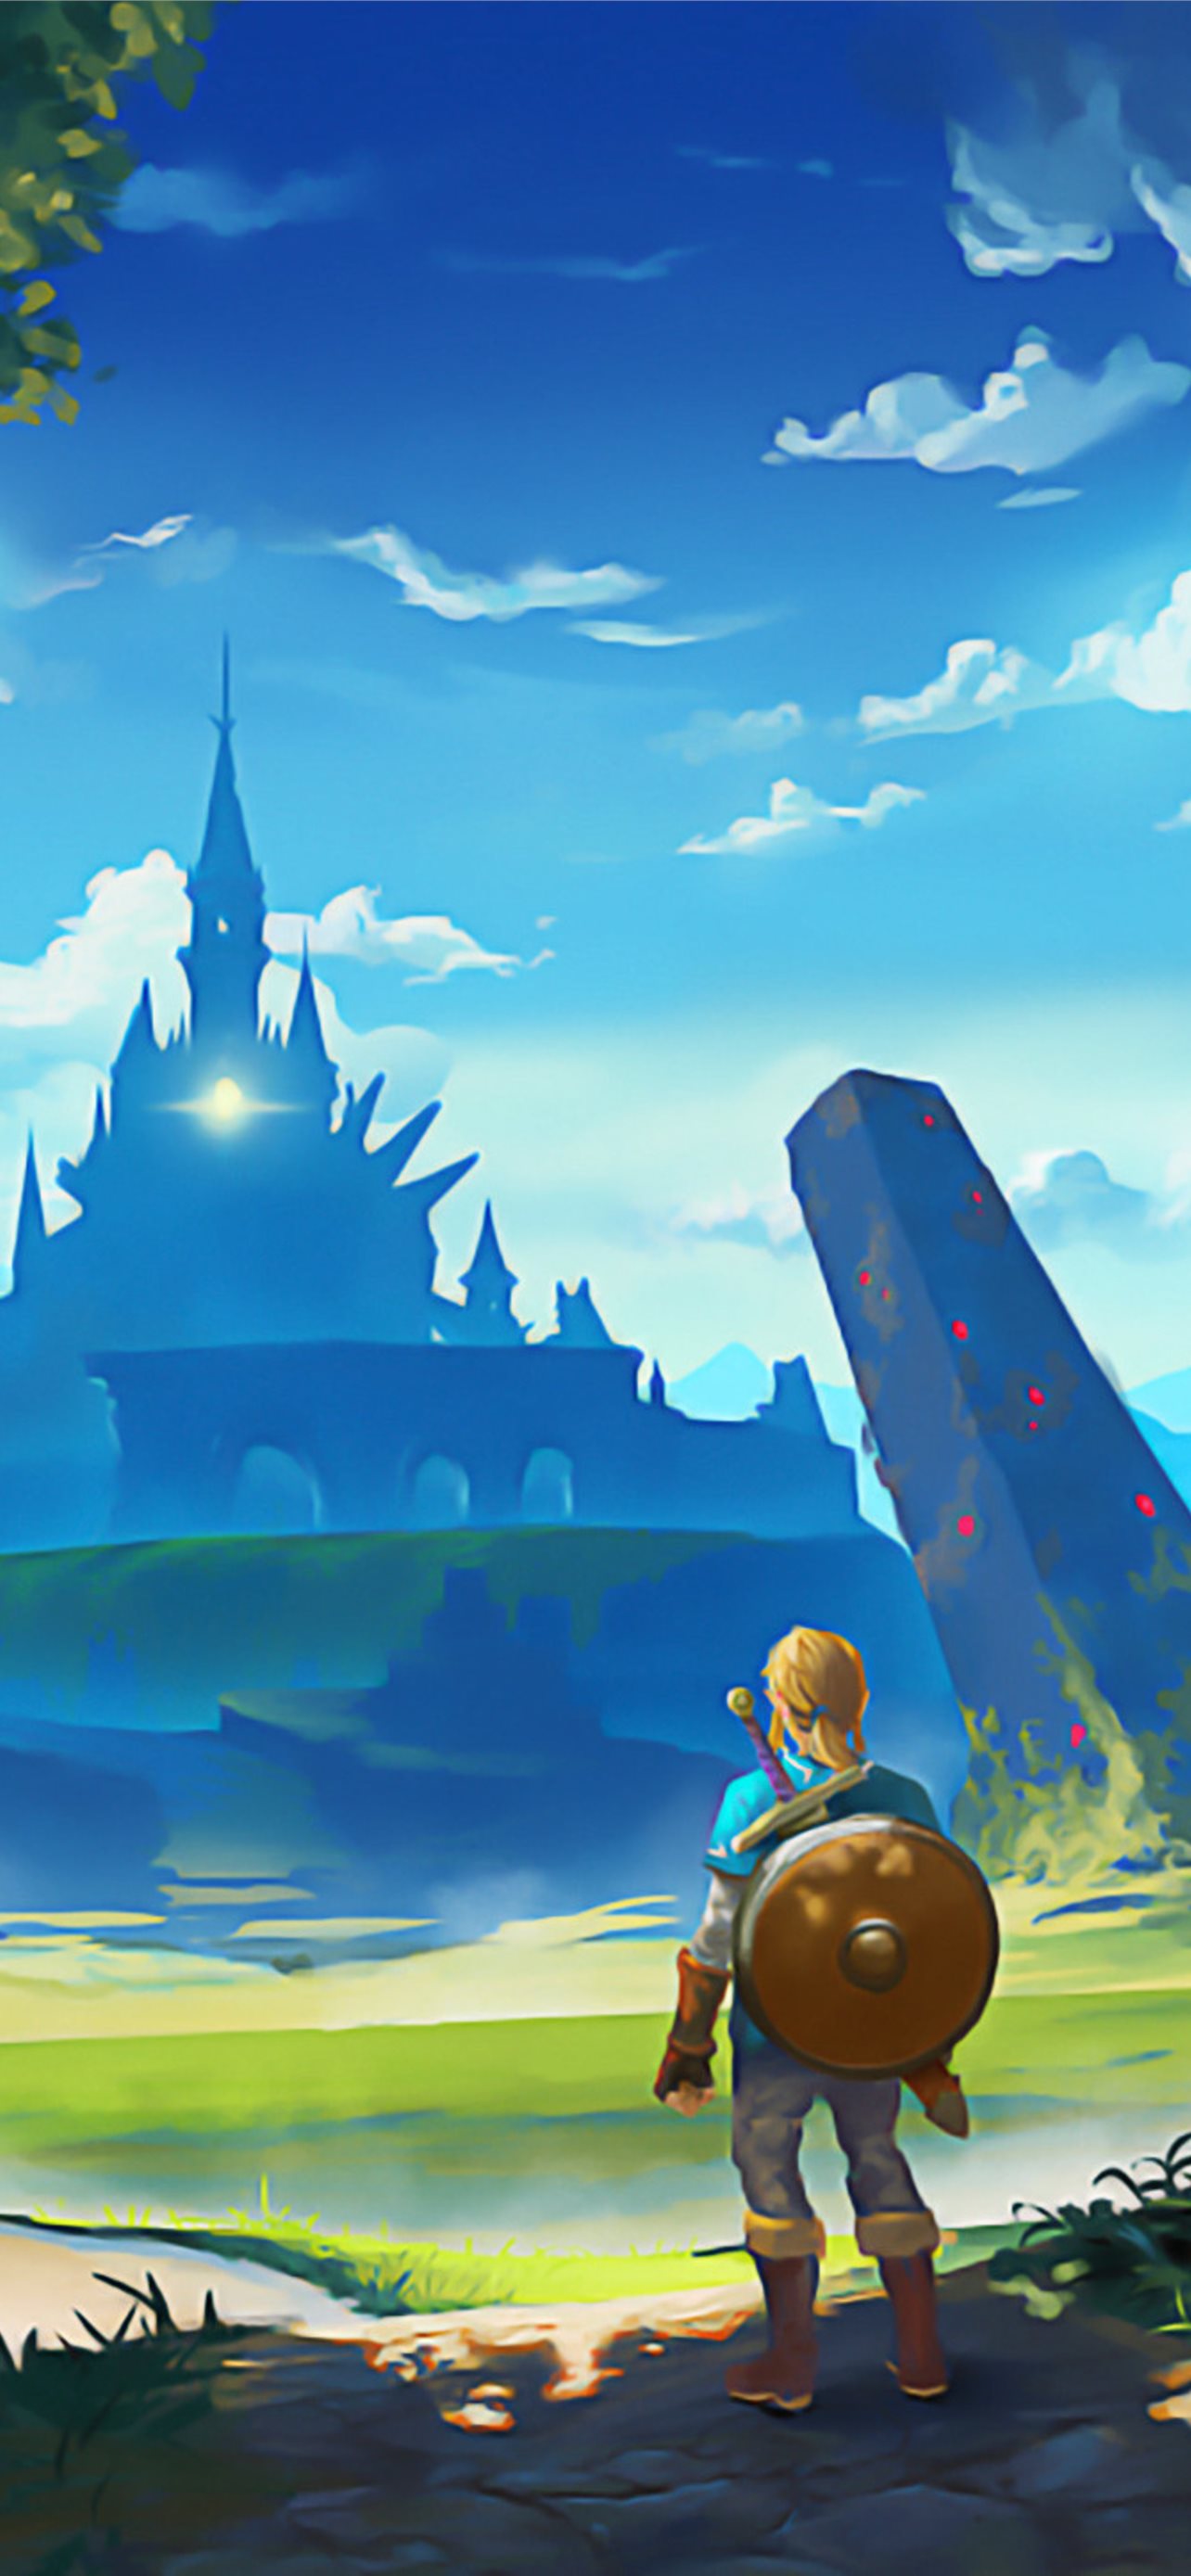 Download The Legend Of Zelda wallpapers for mobile phone free The Legend  Of Zelda HD pictures